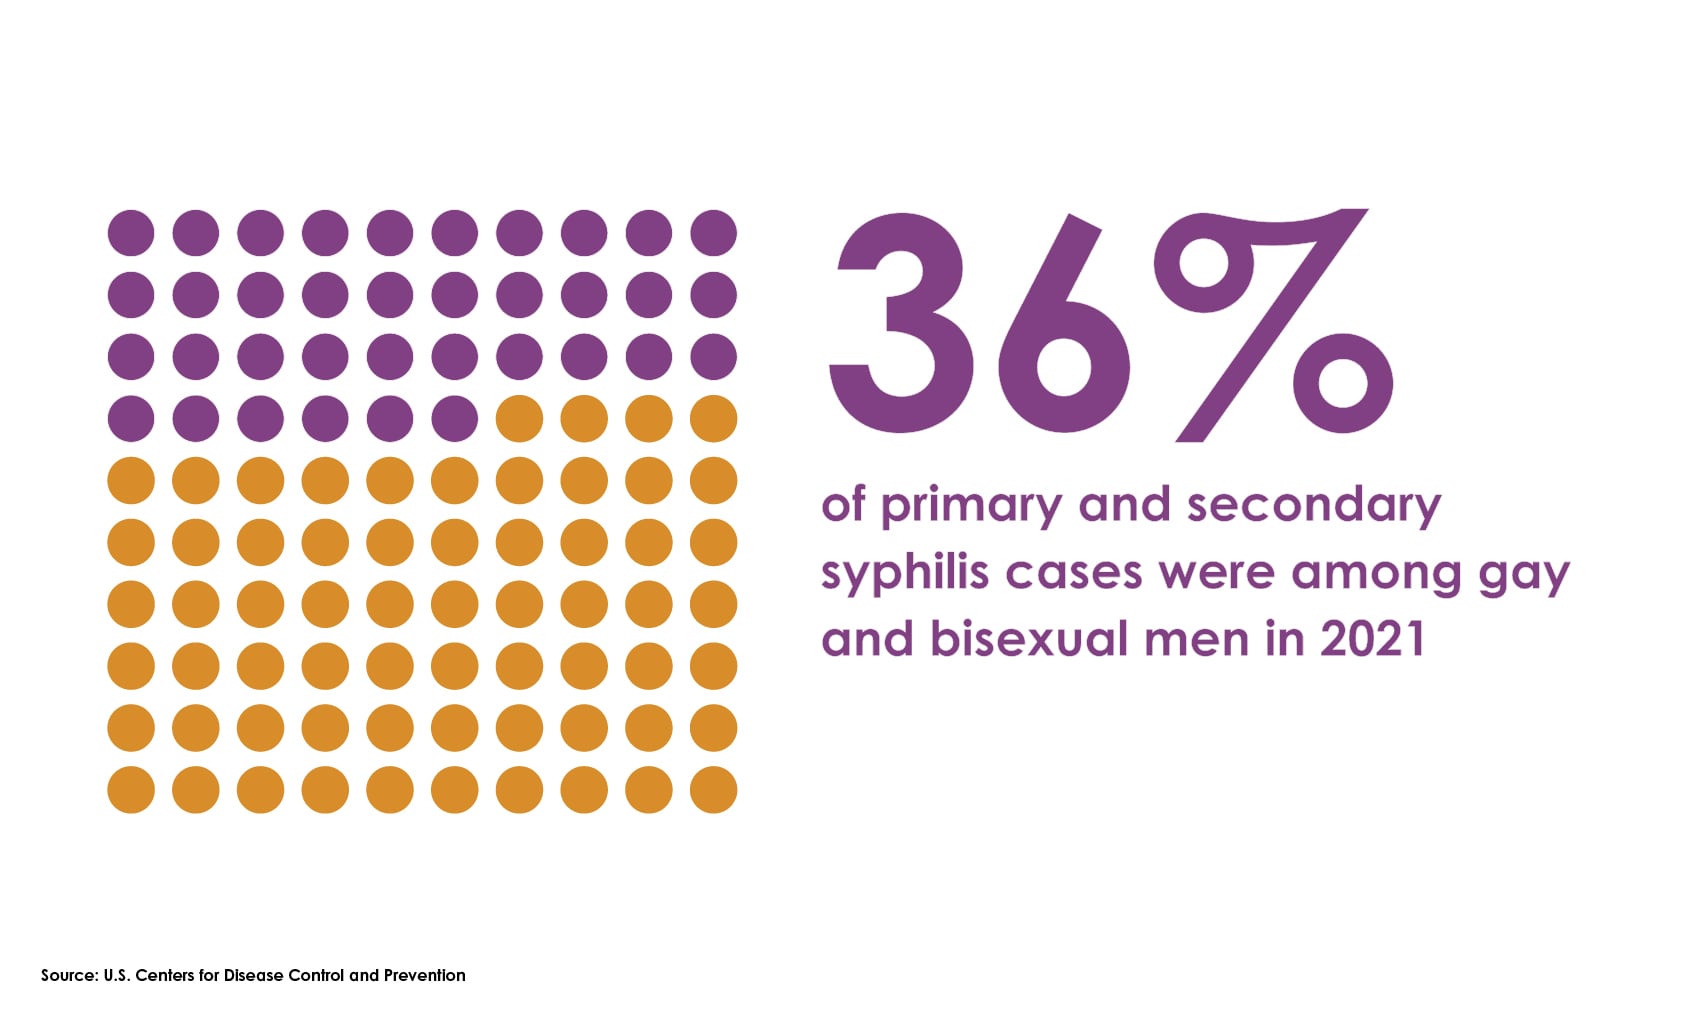 A waffle chart showing that in 2021, 36% of primary and secondary syphilis cases were among gay and bisexual men.